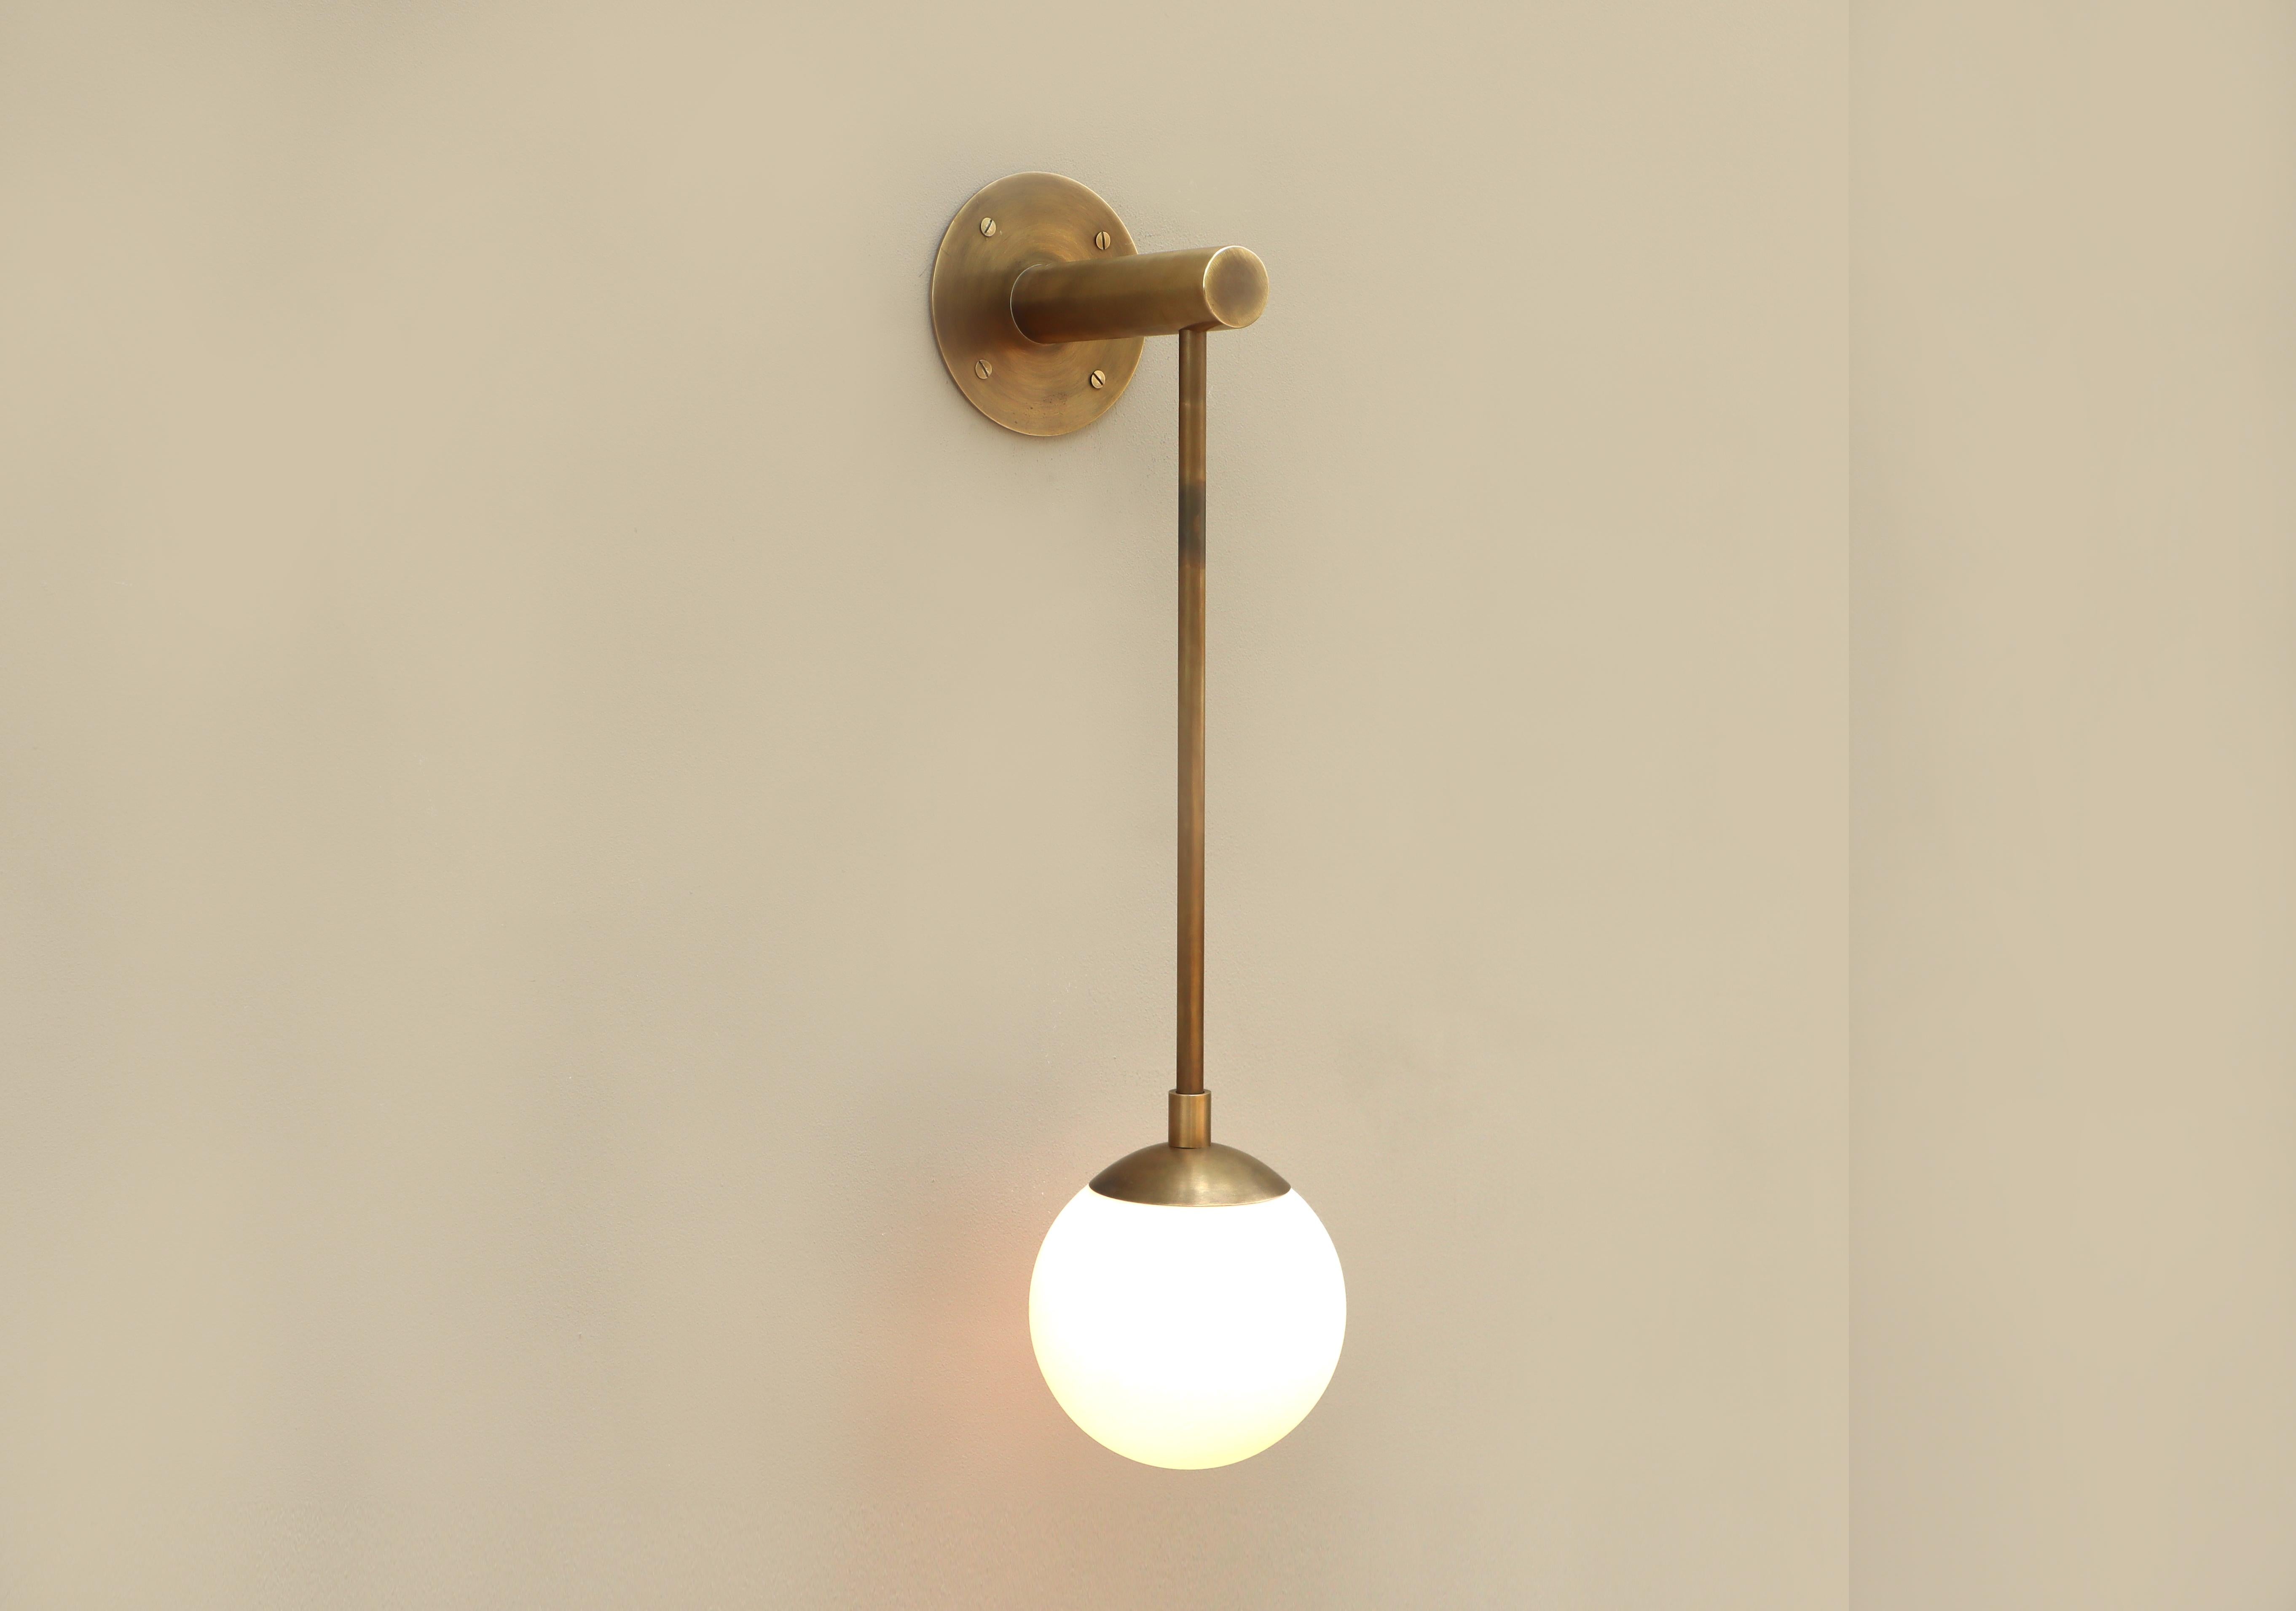 Dot Long Glass Globe Wall Sconce by Lamp Shaper
Dimensions: D 15 x W 19 x H 63.5 cm.
Materials: Brass and glass.

Different finishes available: raw brass, aged brass, burnt brass and brushed brass Please contact us.

All our lamps can be wired